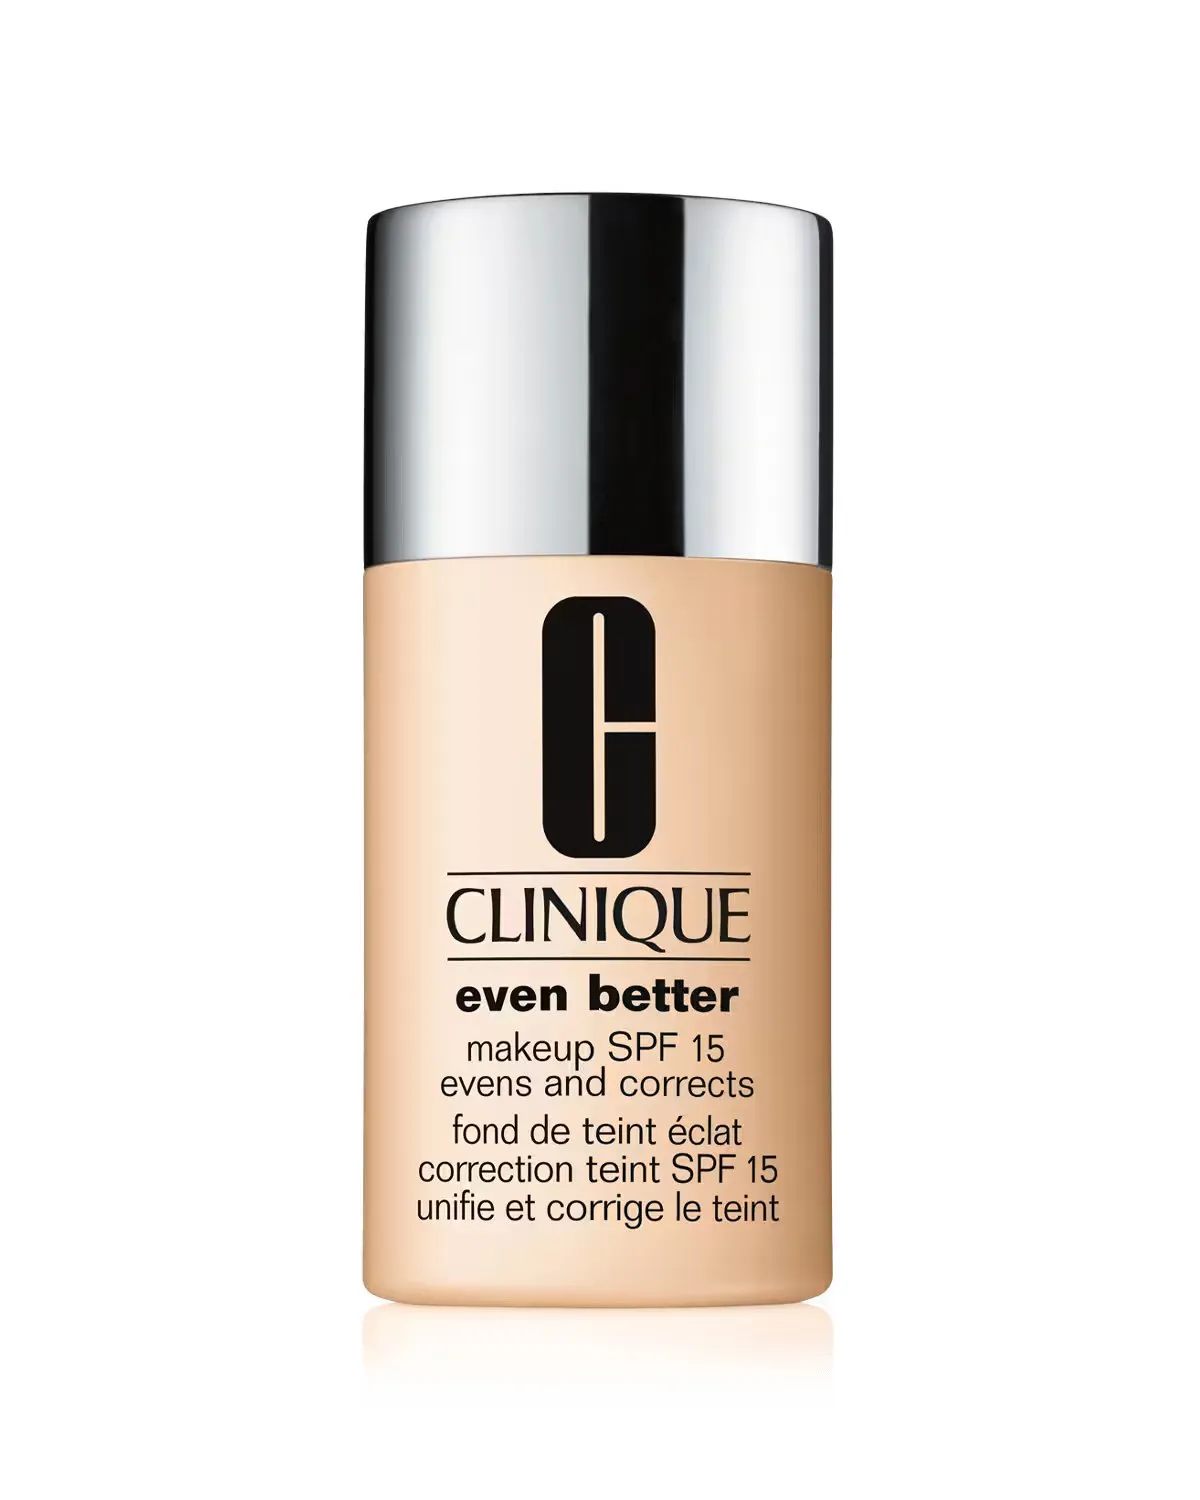 FEMMENORDIC's choice in the Clinique Even Better vs Even Better Glow comparison, the Clinique Even Better Makeup SPF15.